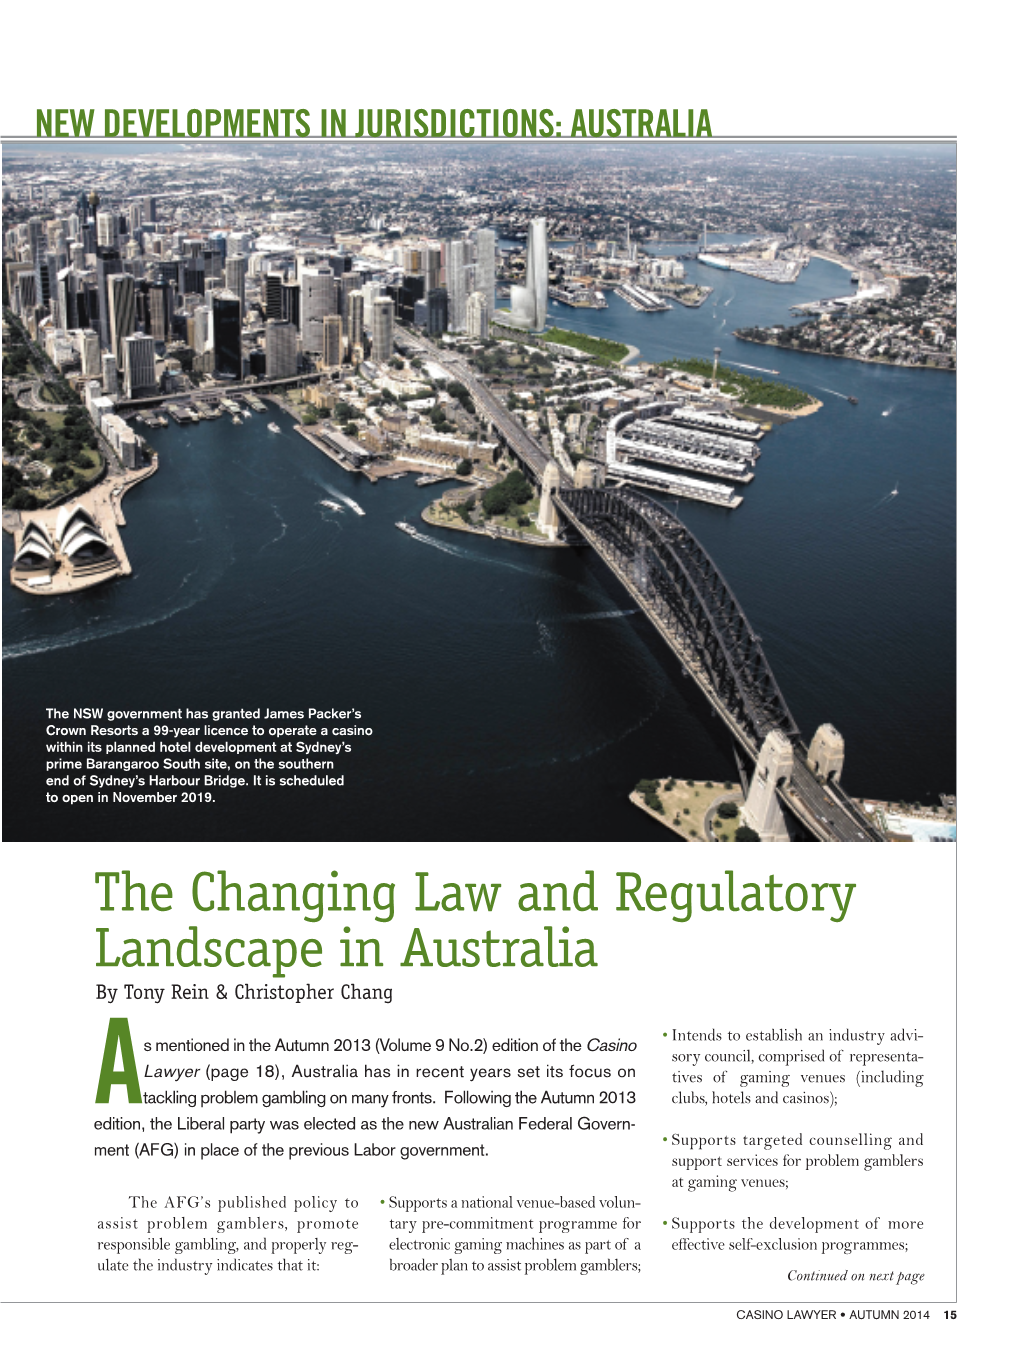 The Changing Law and Regulatory Landscape in Australia by Tony Rein & Christopher Chang